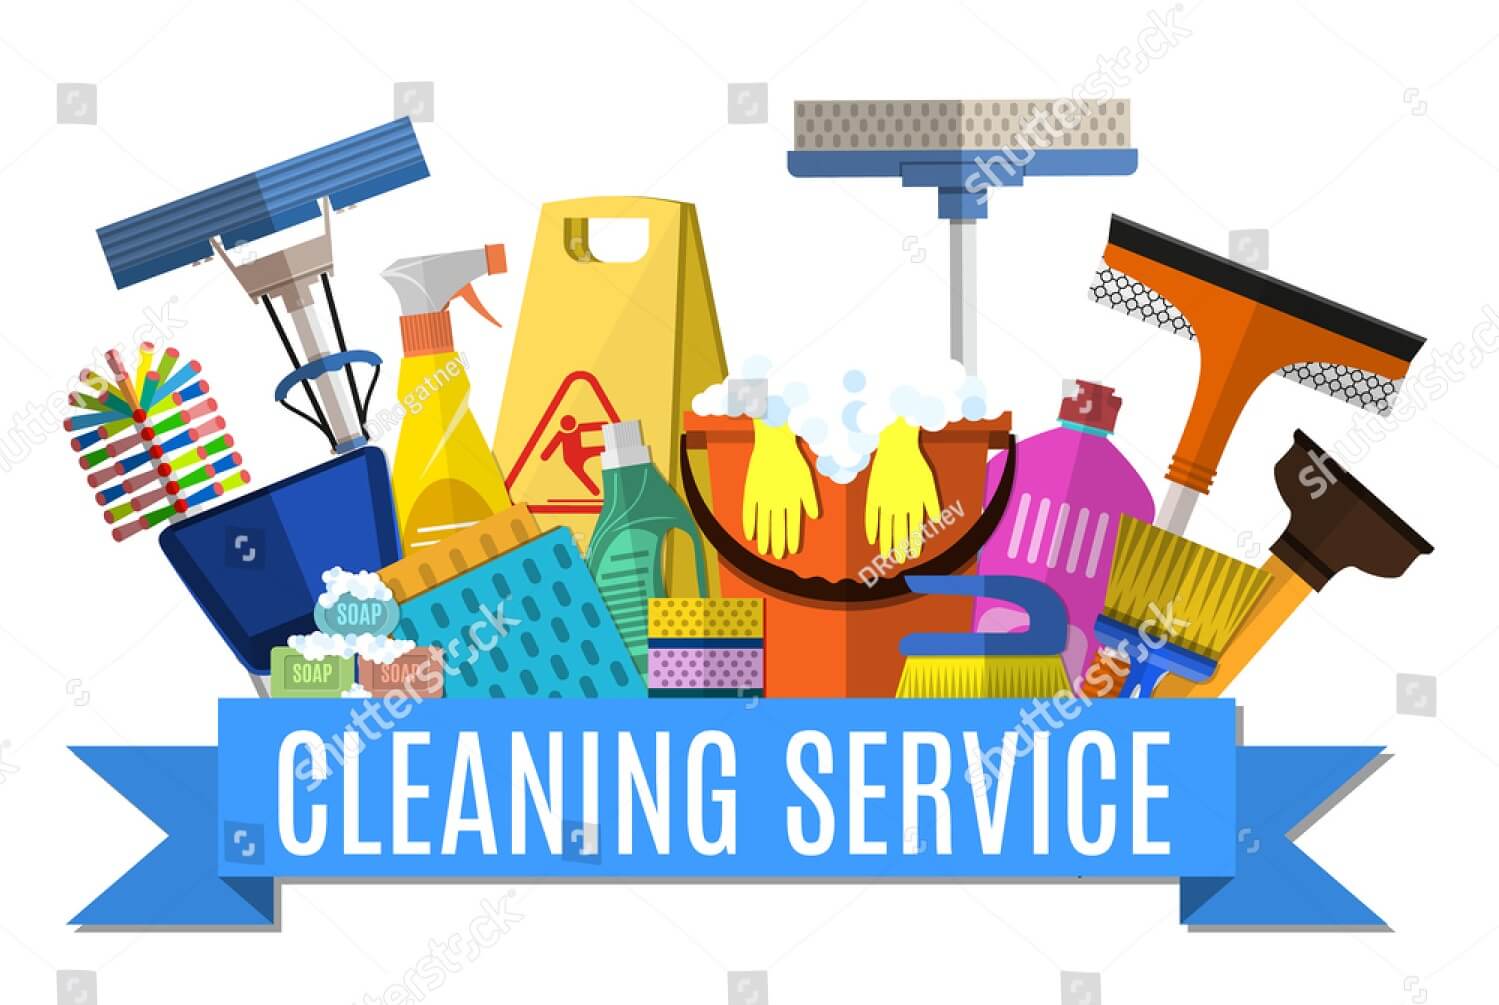 How to Create a Cleaning Service Flyer that Gets Noticed